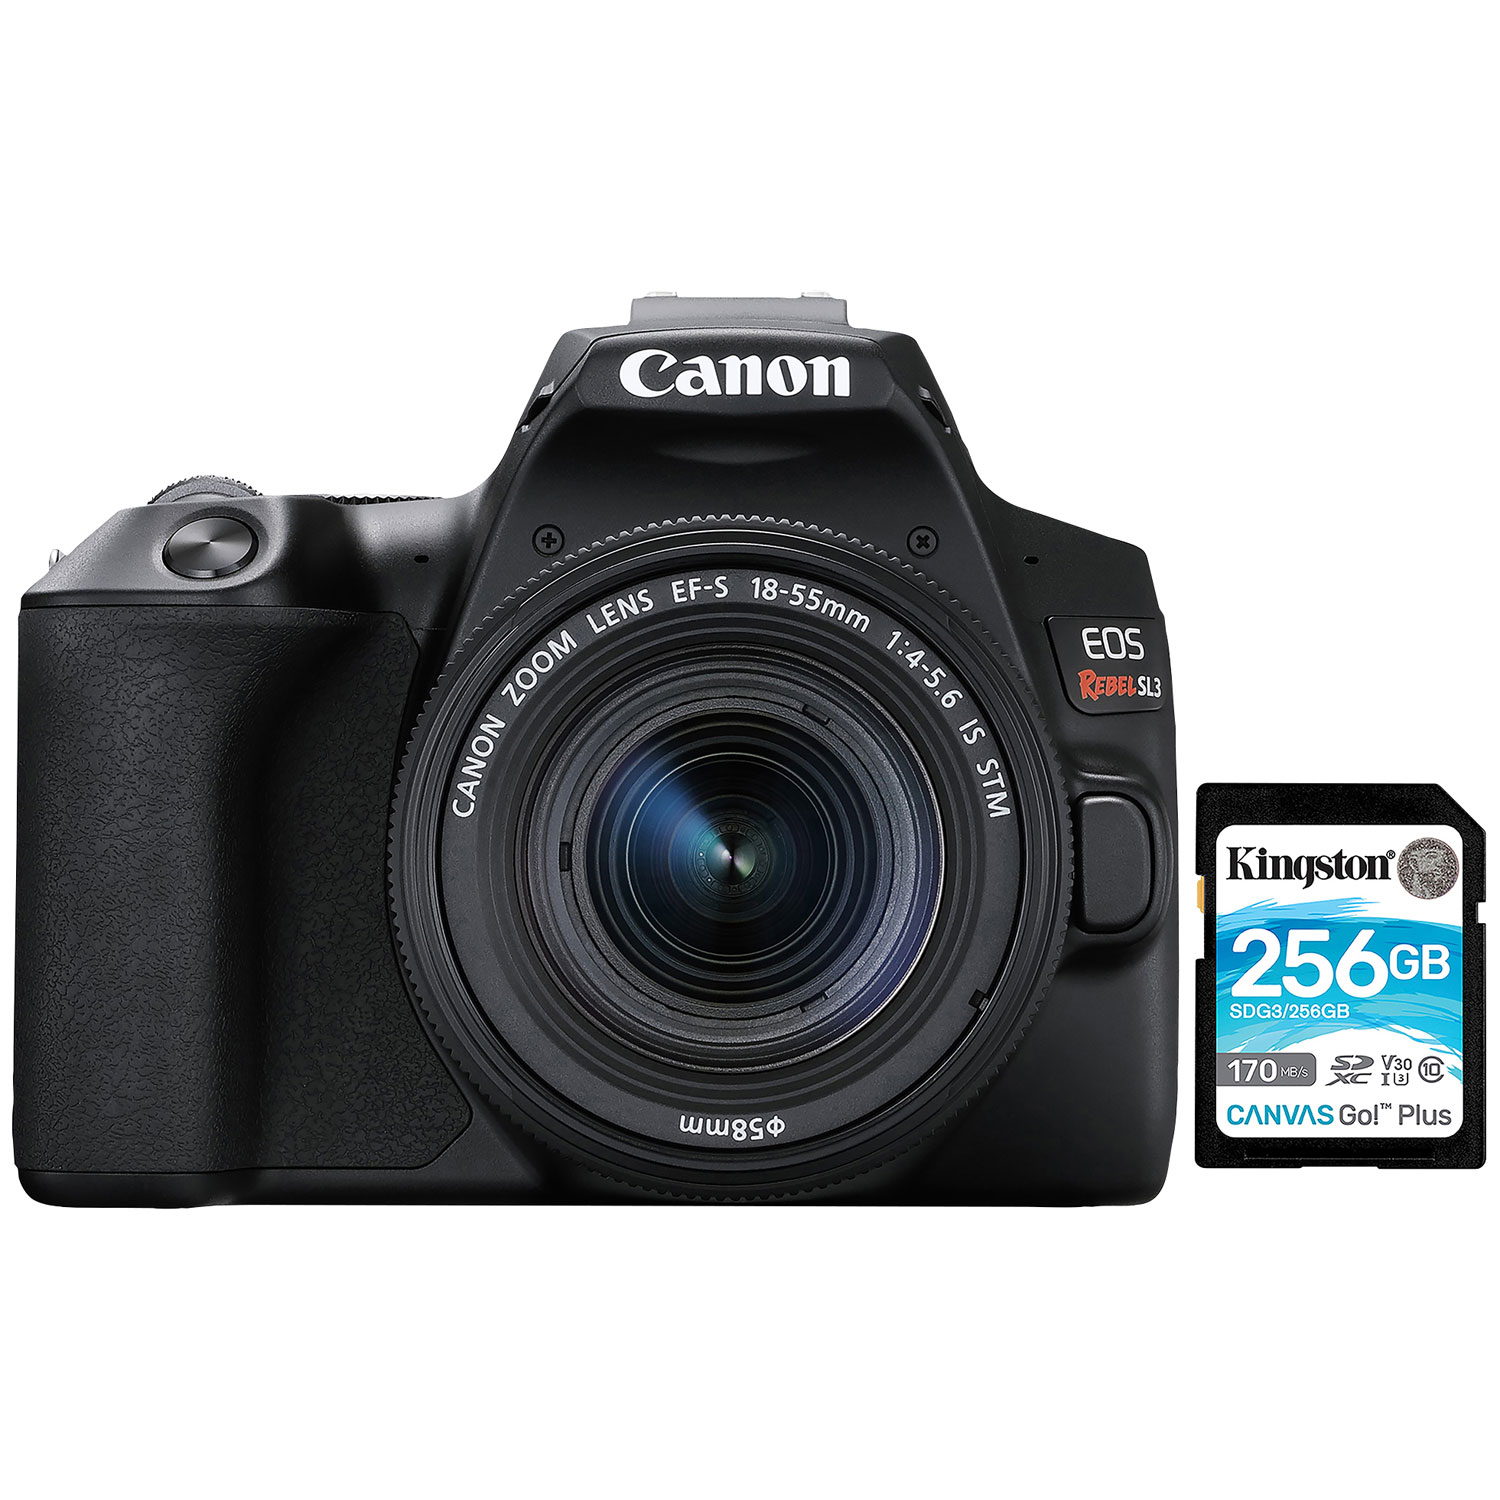 Canon EOS Rebel SL3 DSLR Camera with 18-55mm Lens Kit & 256GB Memory Card